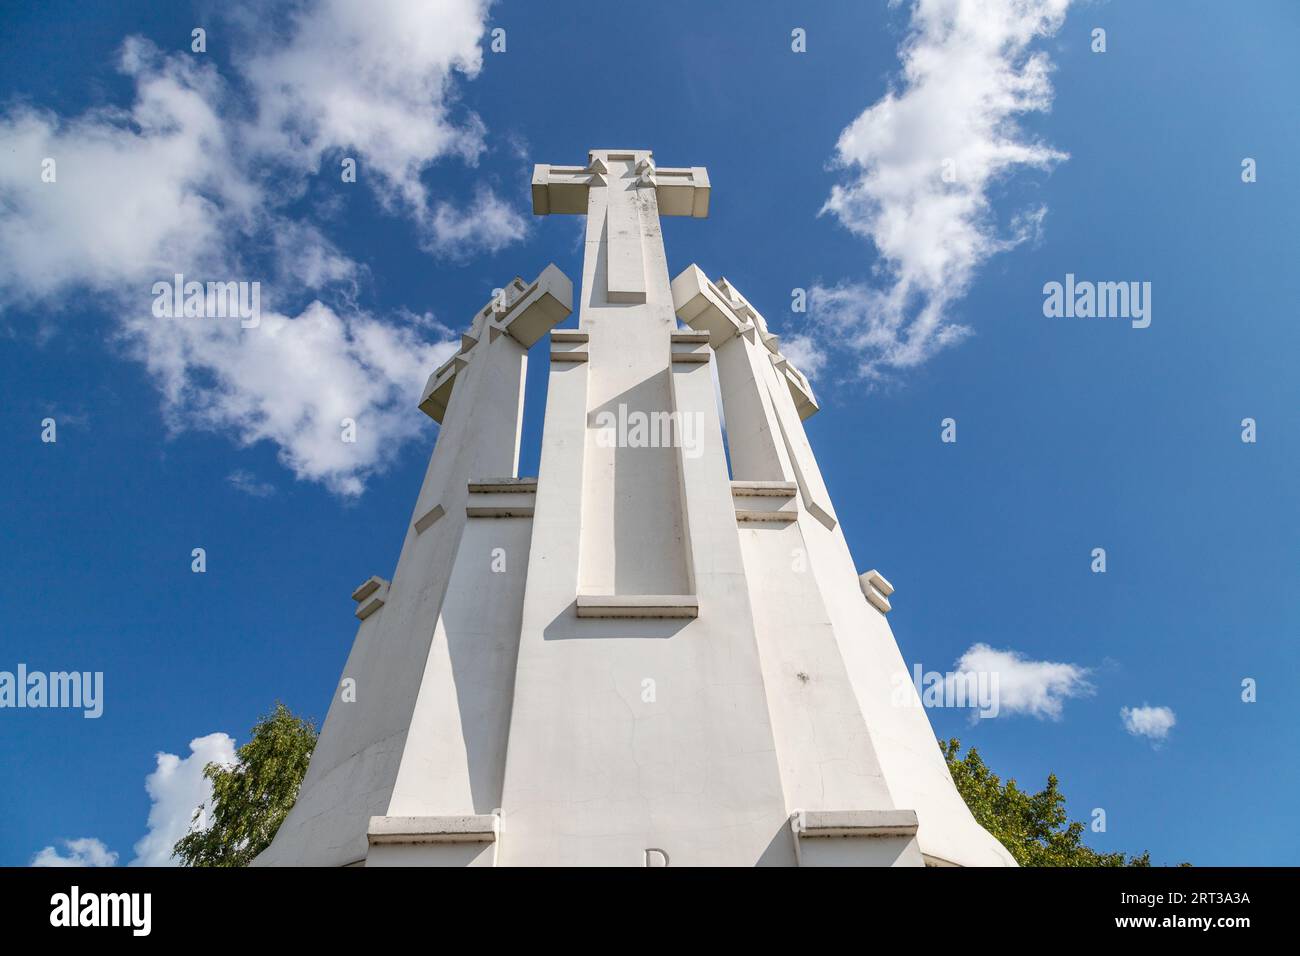 A low angle view of the Three Crosses Monument in Vilnius, Lithuania during a bright summer's day Stock Photo